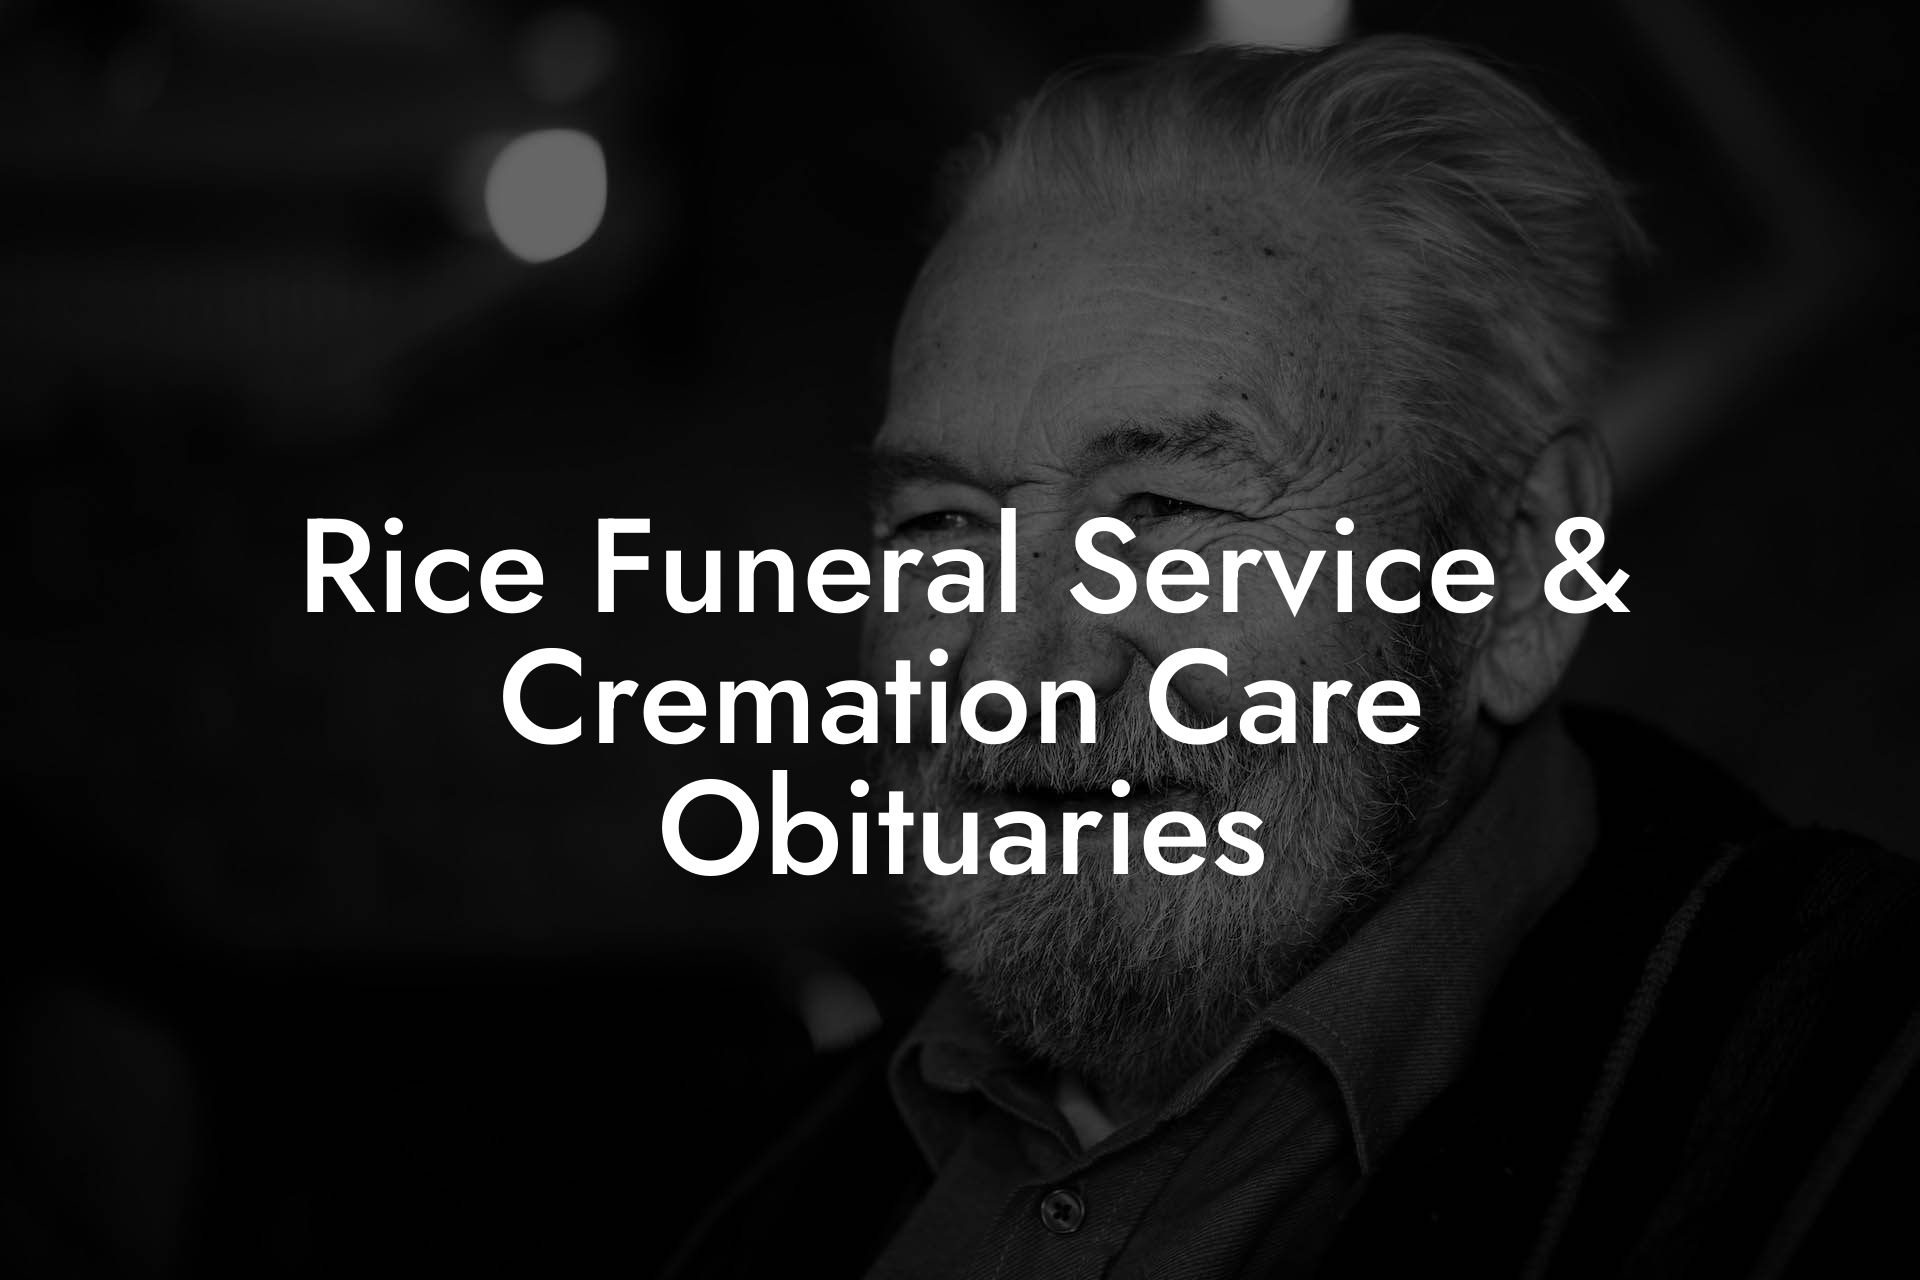 Rice Funeral Service & Cremation Care Obituaries